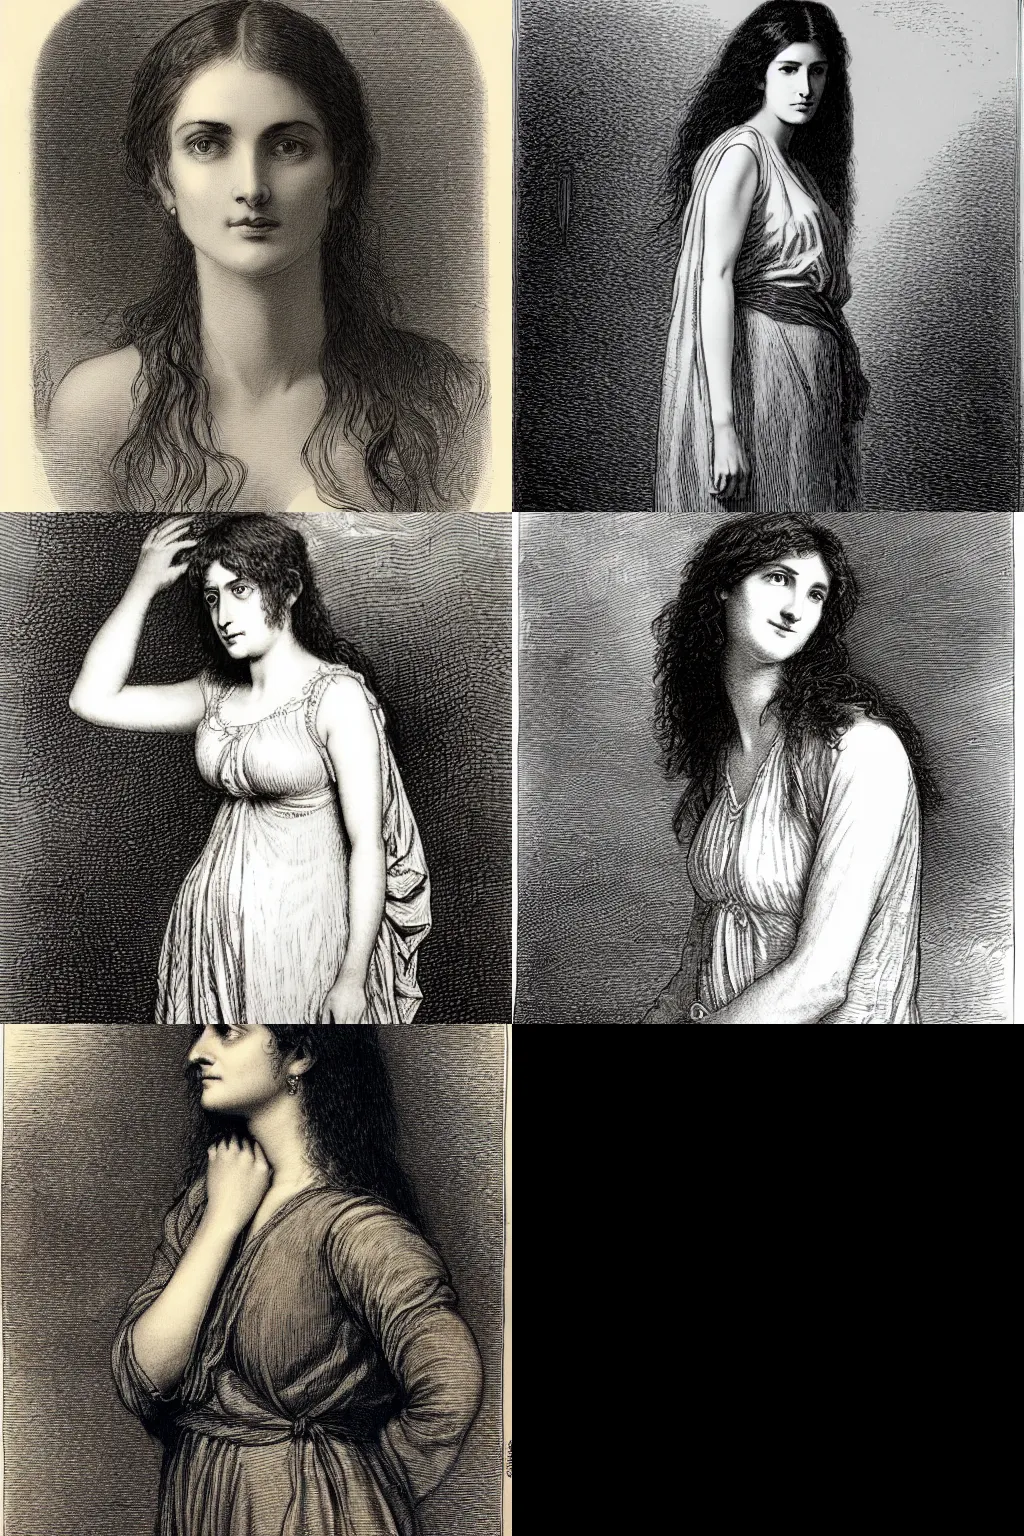 Prompt: an hd drawing of a woman by gustave dore. she has straight long dark brown hair, parted in the middle. she has large dark brown eyes, a small refined nose, and thin lips. she is wearing a sleeveless white blouse, a pair of dark brown capris, and black loafers.